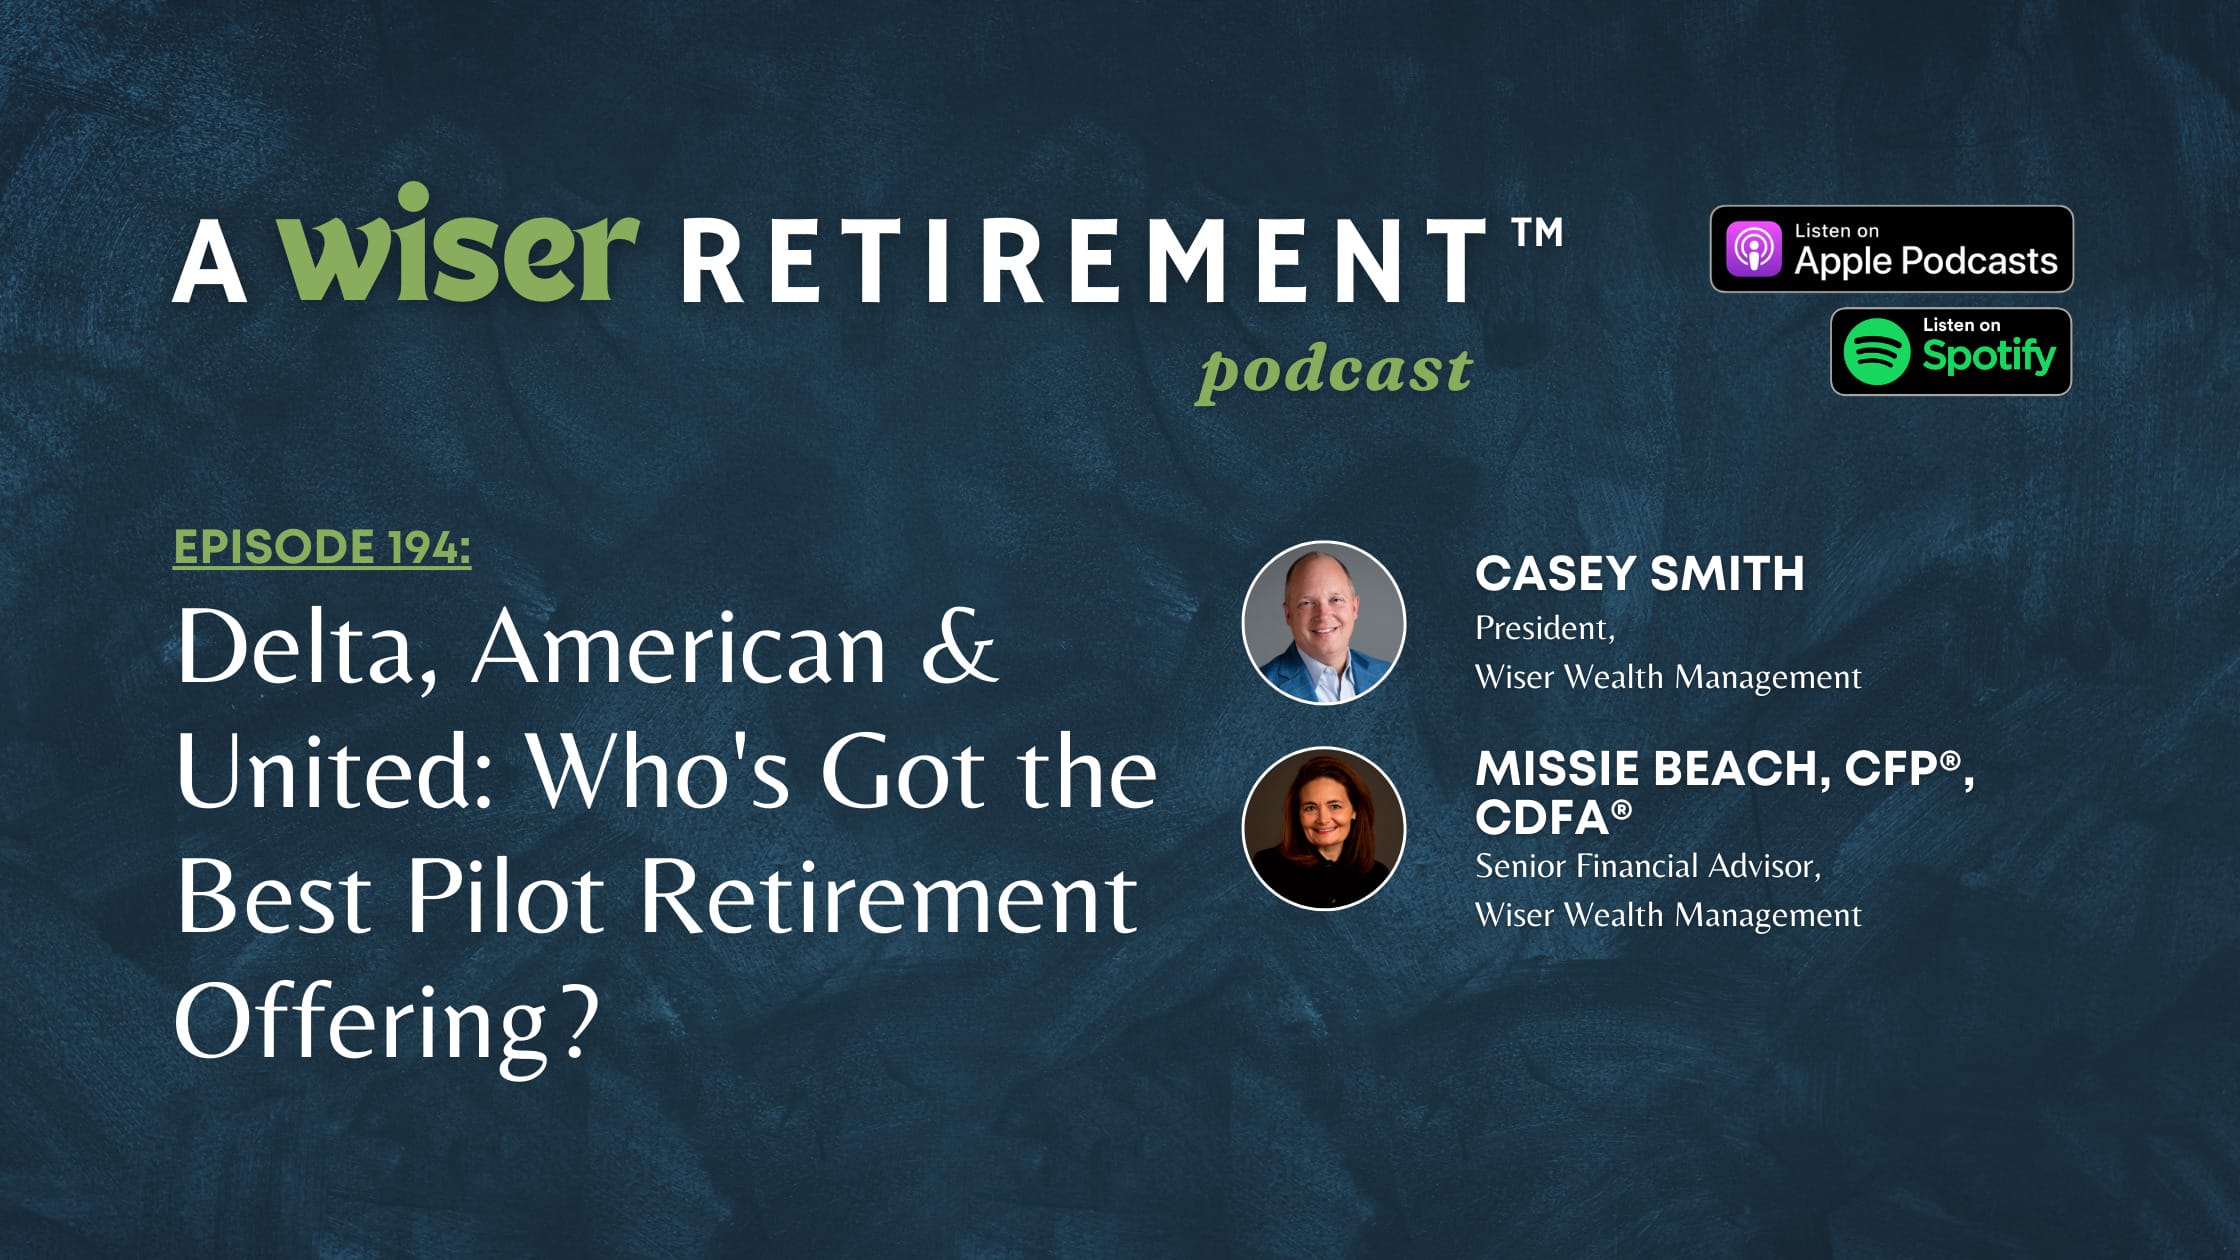 Delta, American & United: Who’s Got the Best Pilot Retirement Offering?